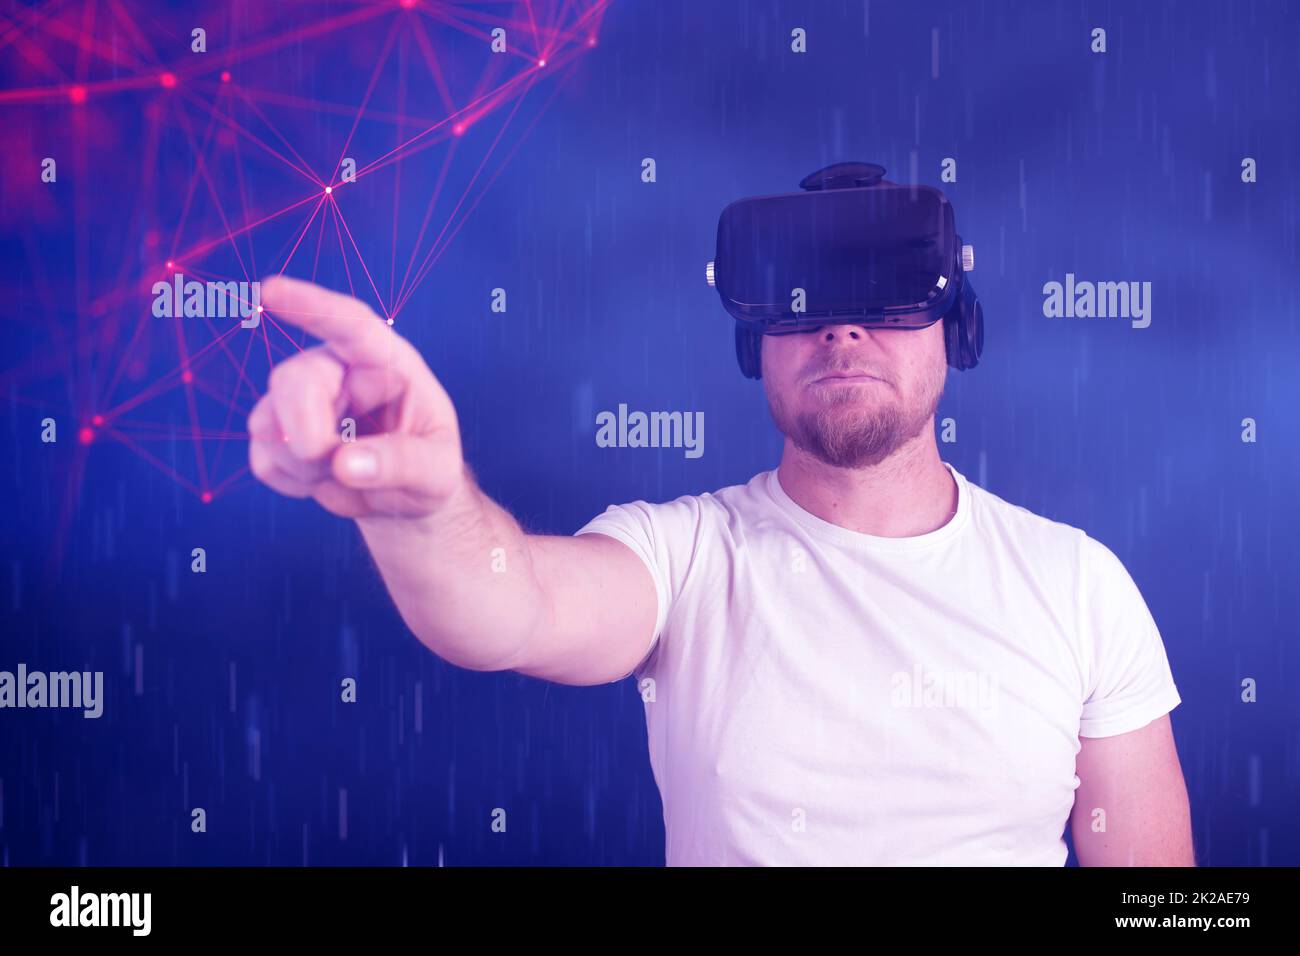 Metaverse Technology concept. Virtual augmented reality on social network. Stock Photo